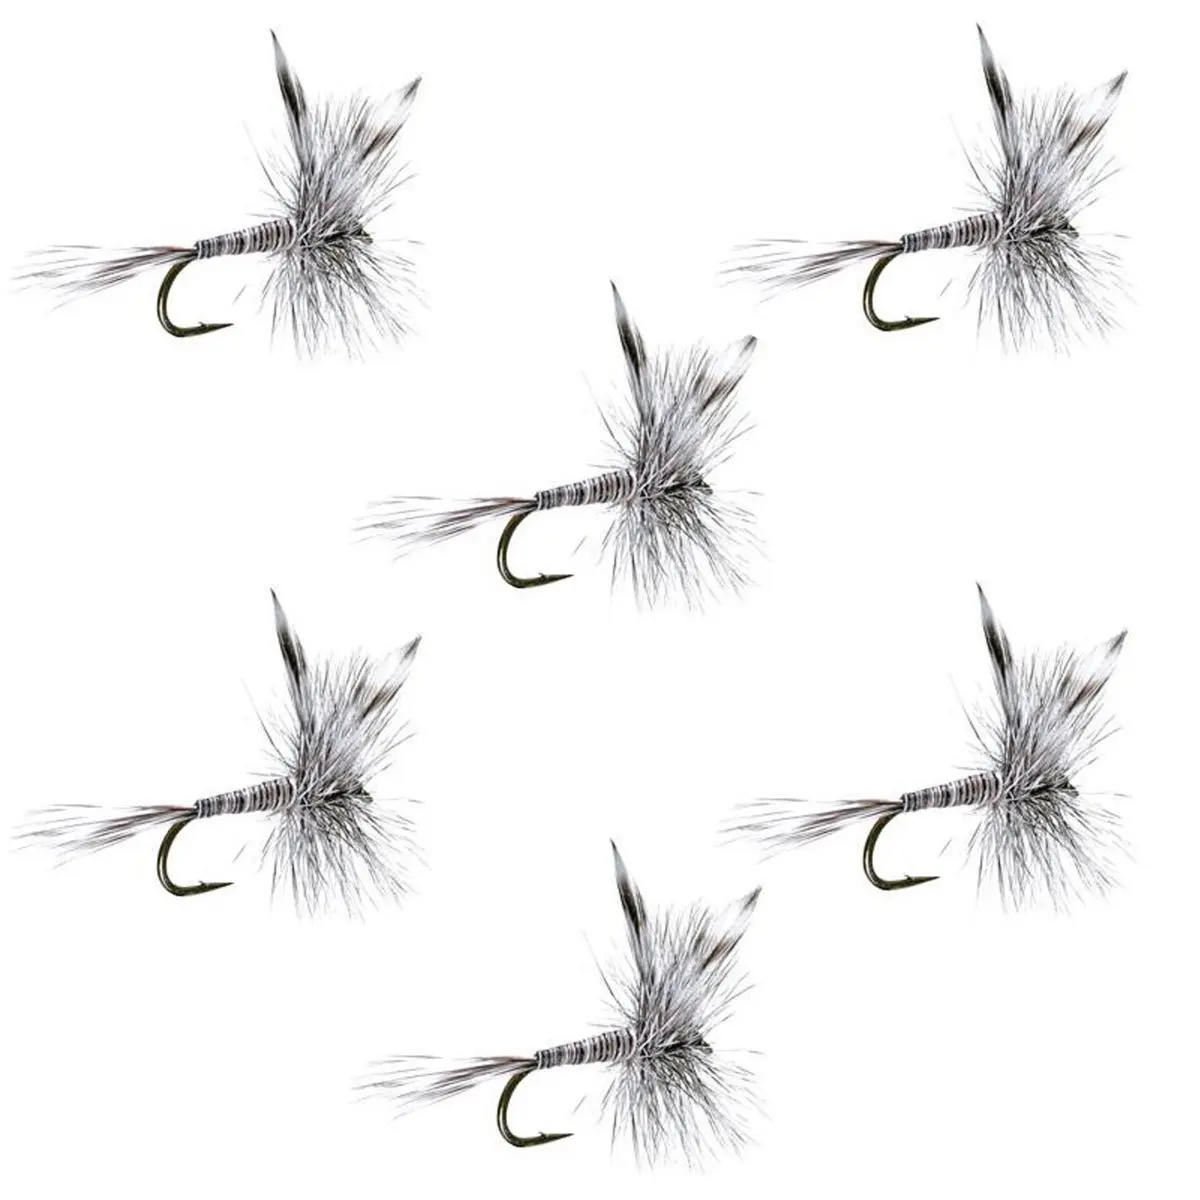 The Fly Fishing Place Mosquito Classic Trout Dry Fly Fishing Flies Set of 6 Flies Size 12 